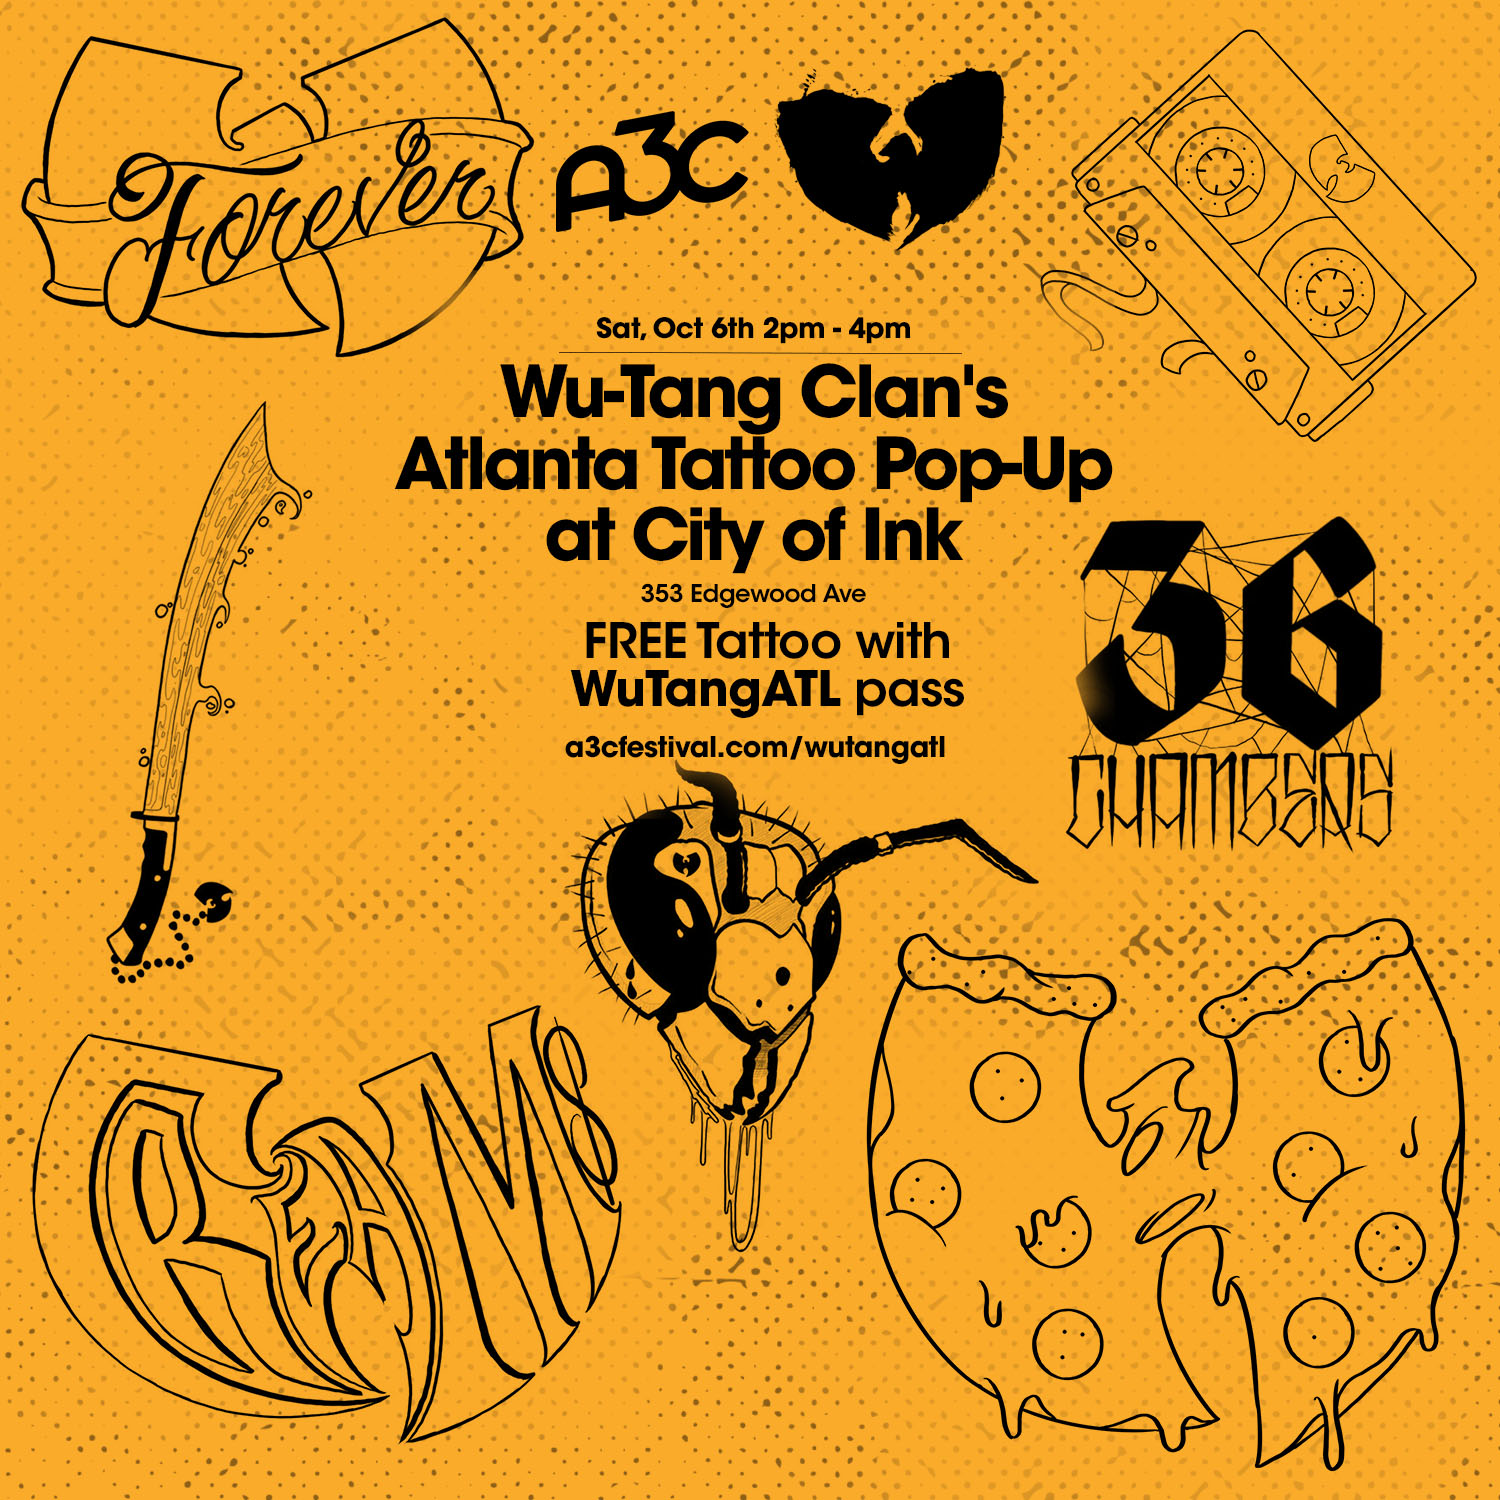 Wu Tang Clan on Twitter Show us your wutang tattoo  httpstconJVAkXVsdS  Twitter